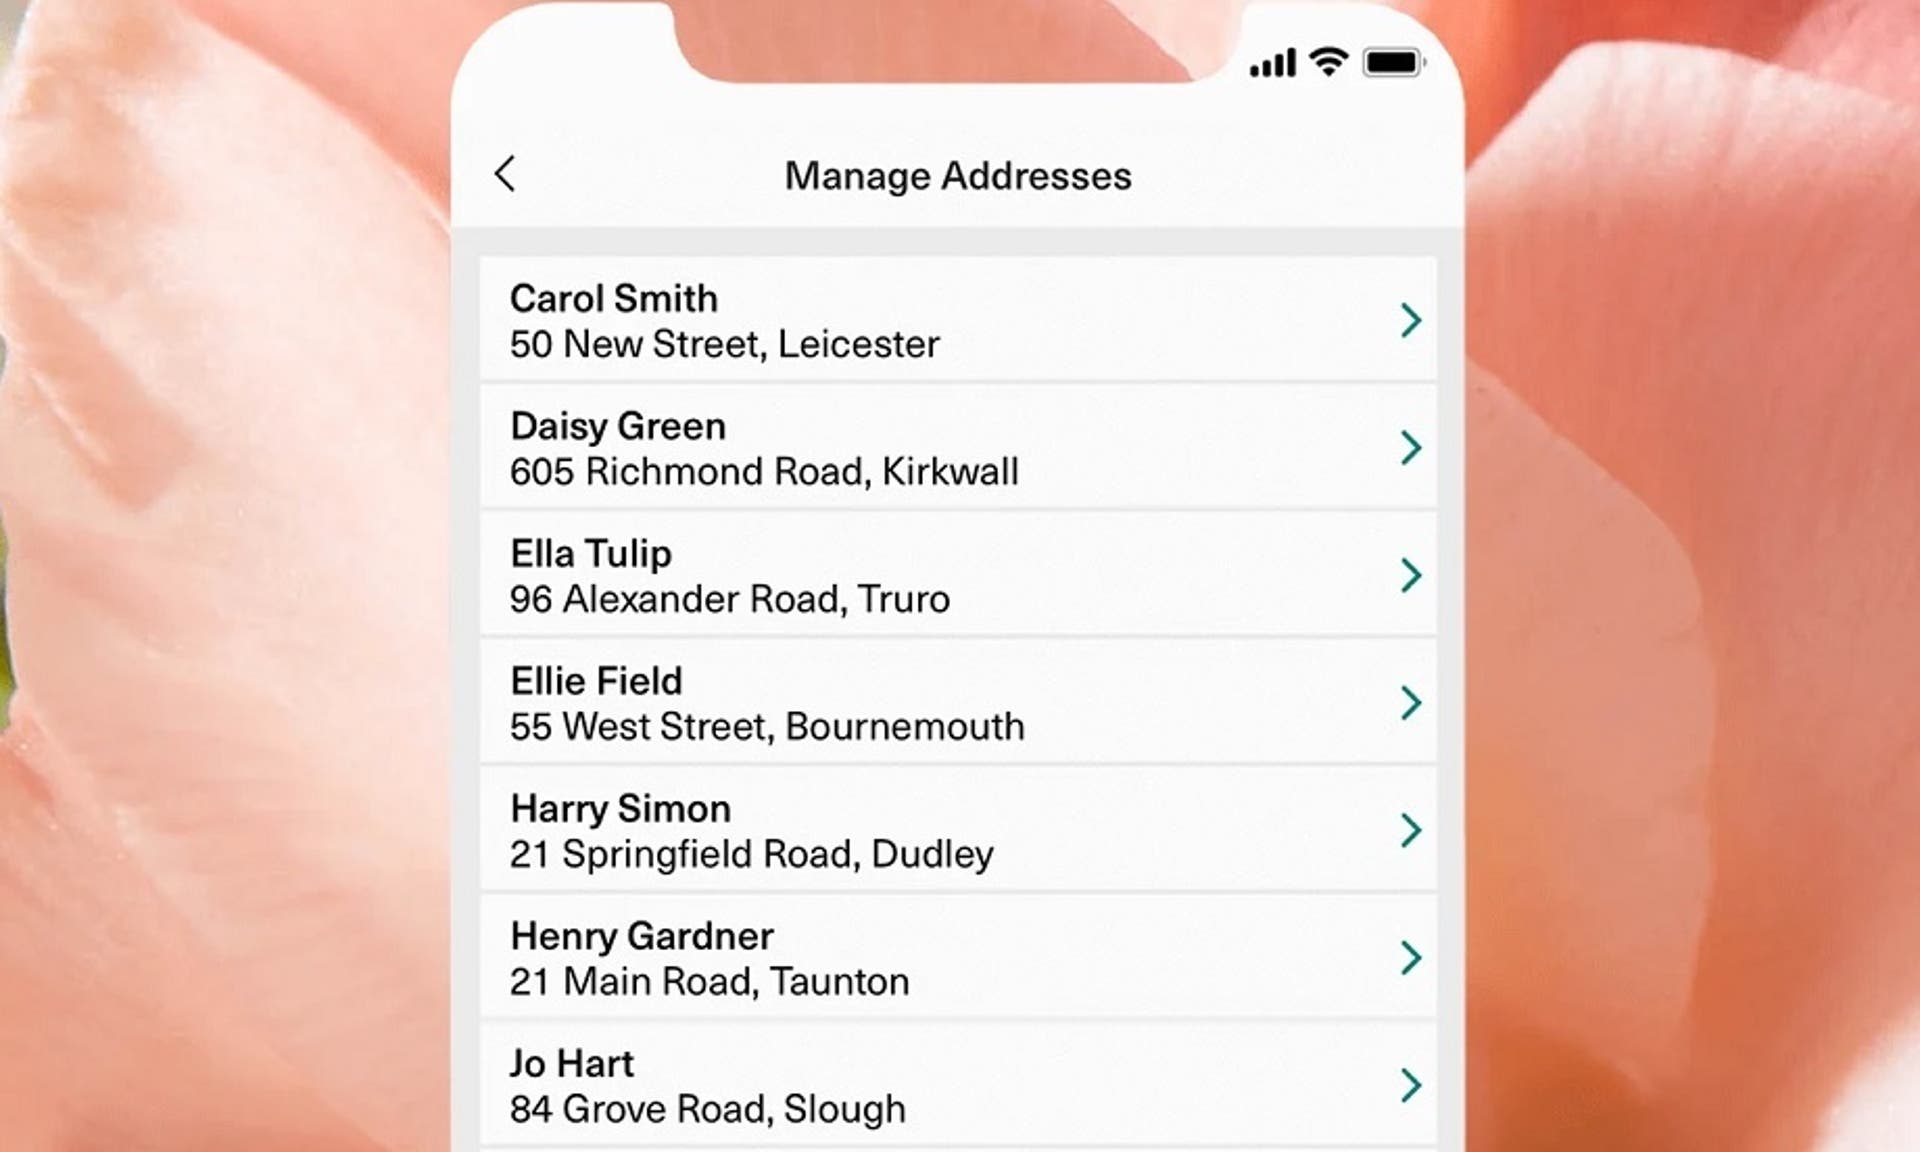  A screenshot of the address management screen on the Bloom & Wild app against a backdrop of an image of a flower 